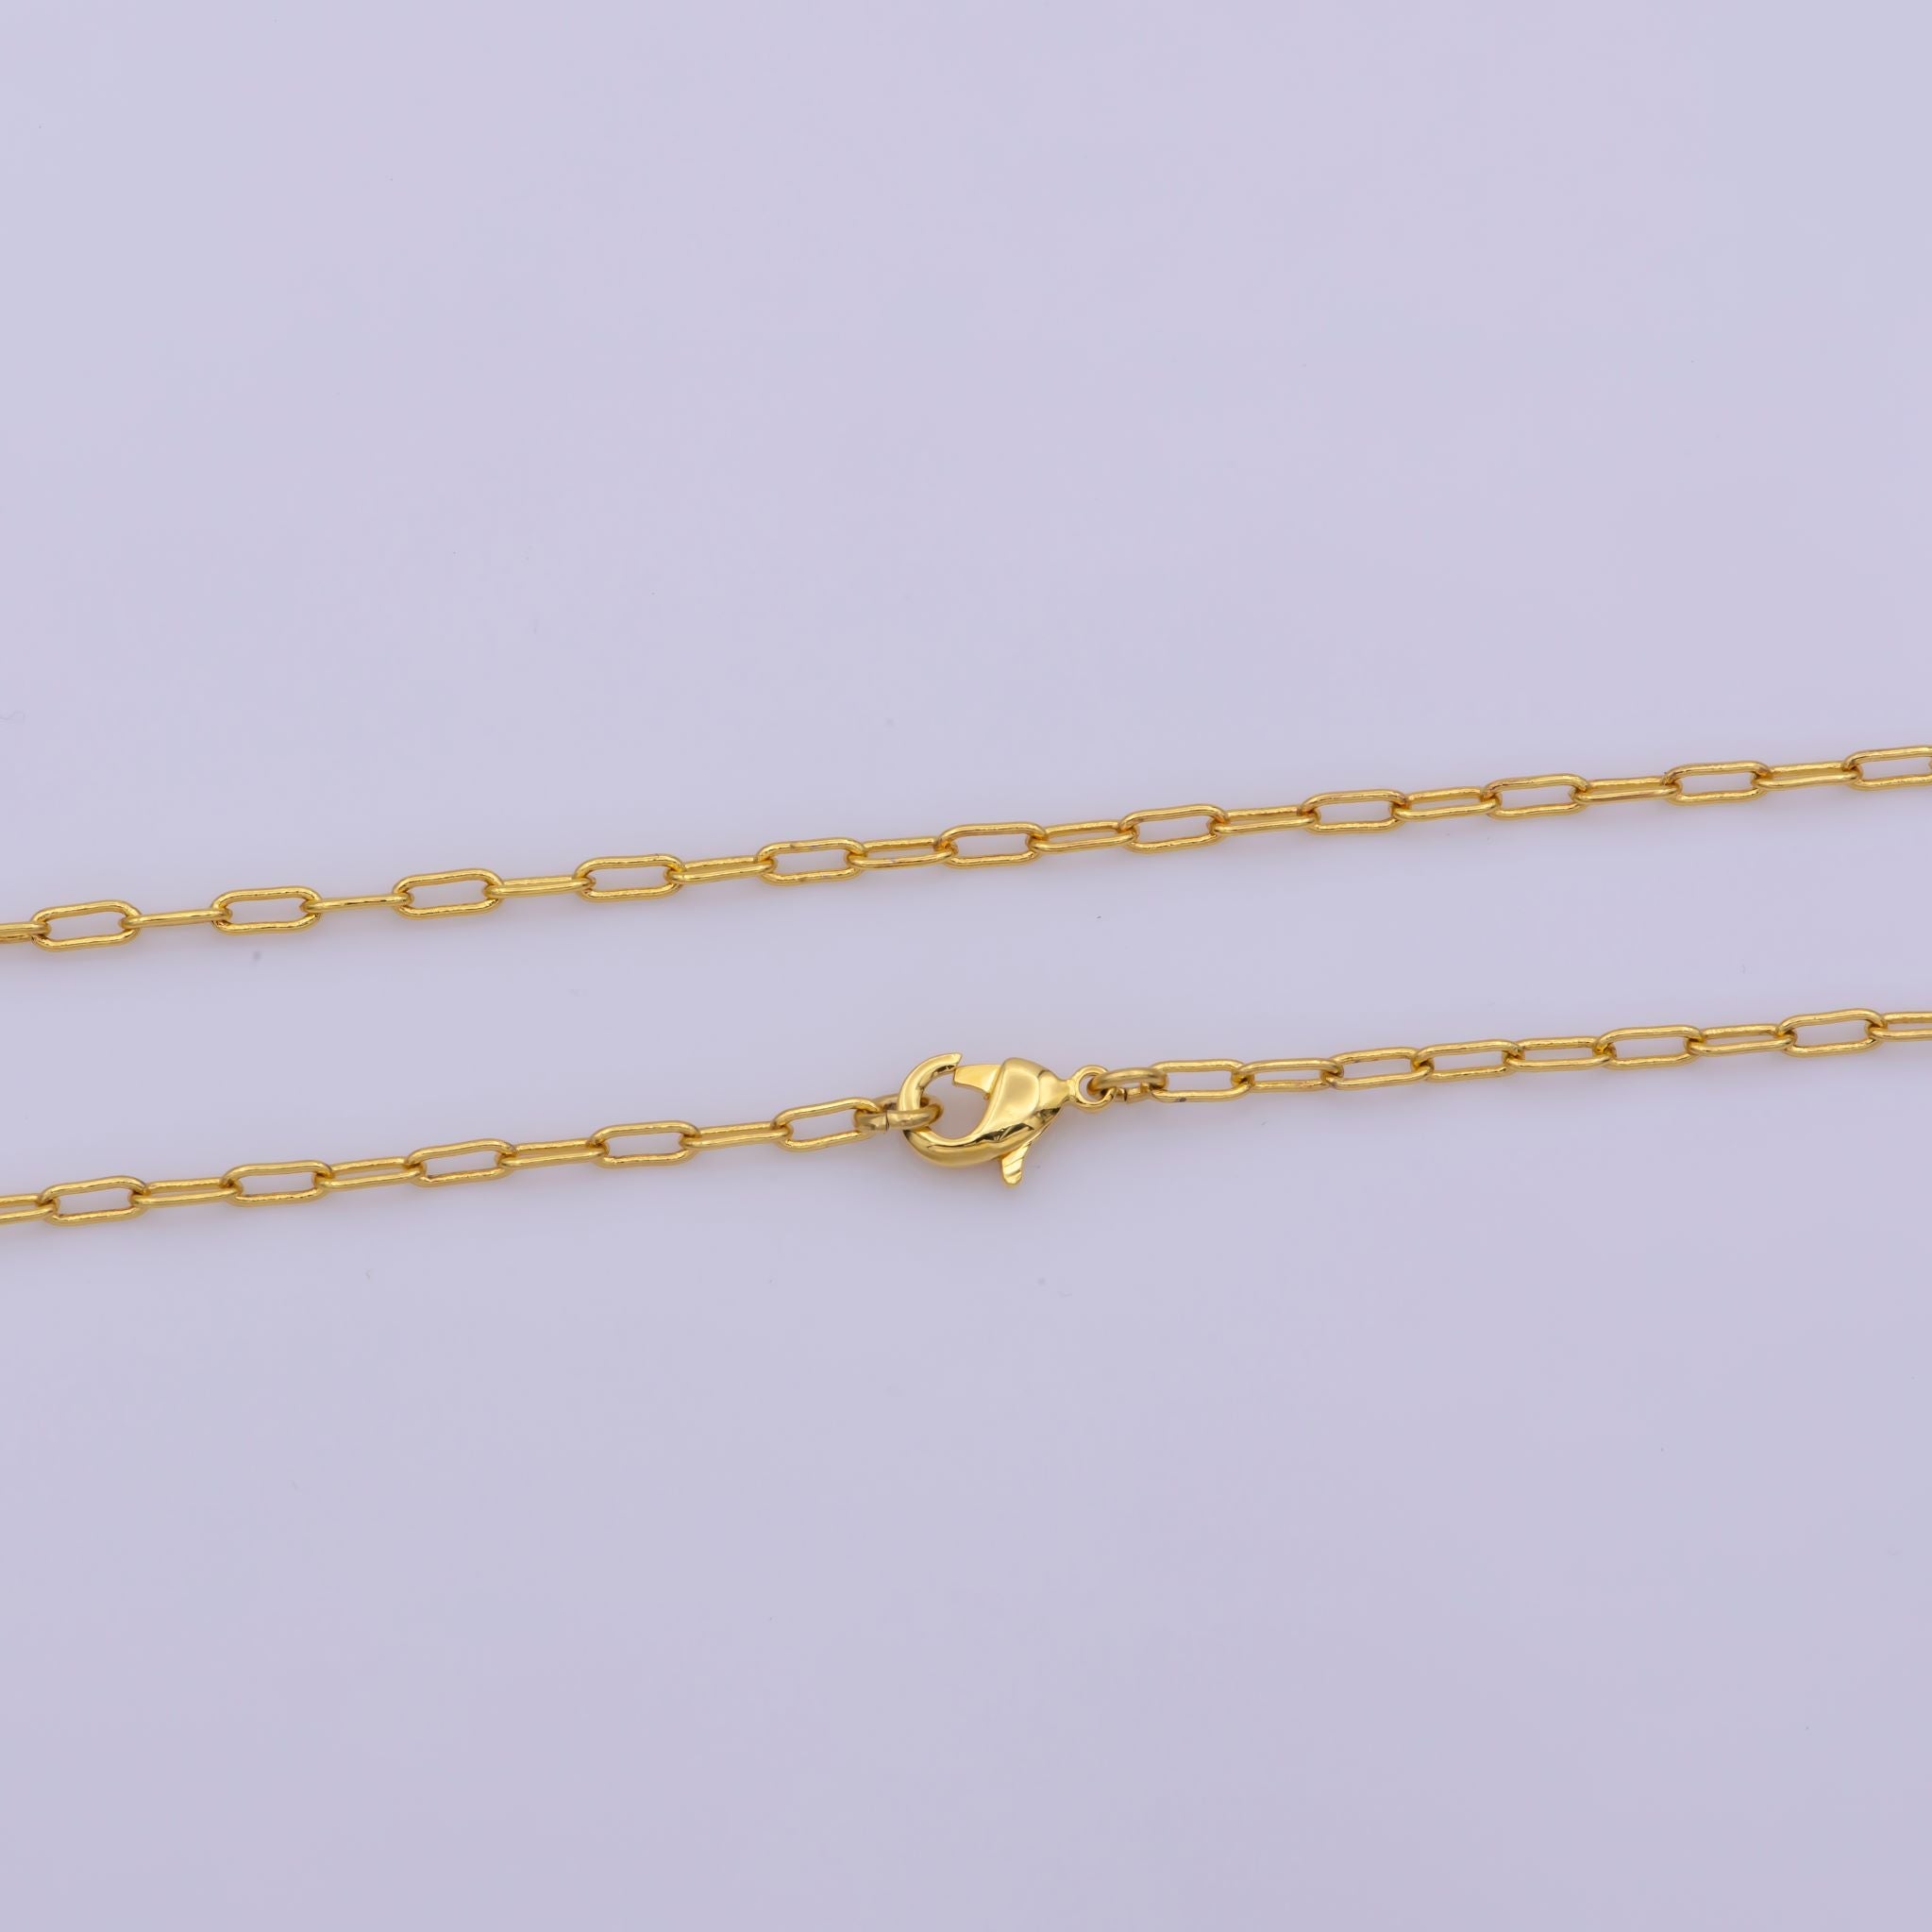 16" Paper Clip Chocker Necklace, Dainty 24k Gold Filled chain necklace, Layering necklace, gold link necklace Ready to Wear chain necklace - DLUXCA